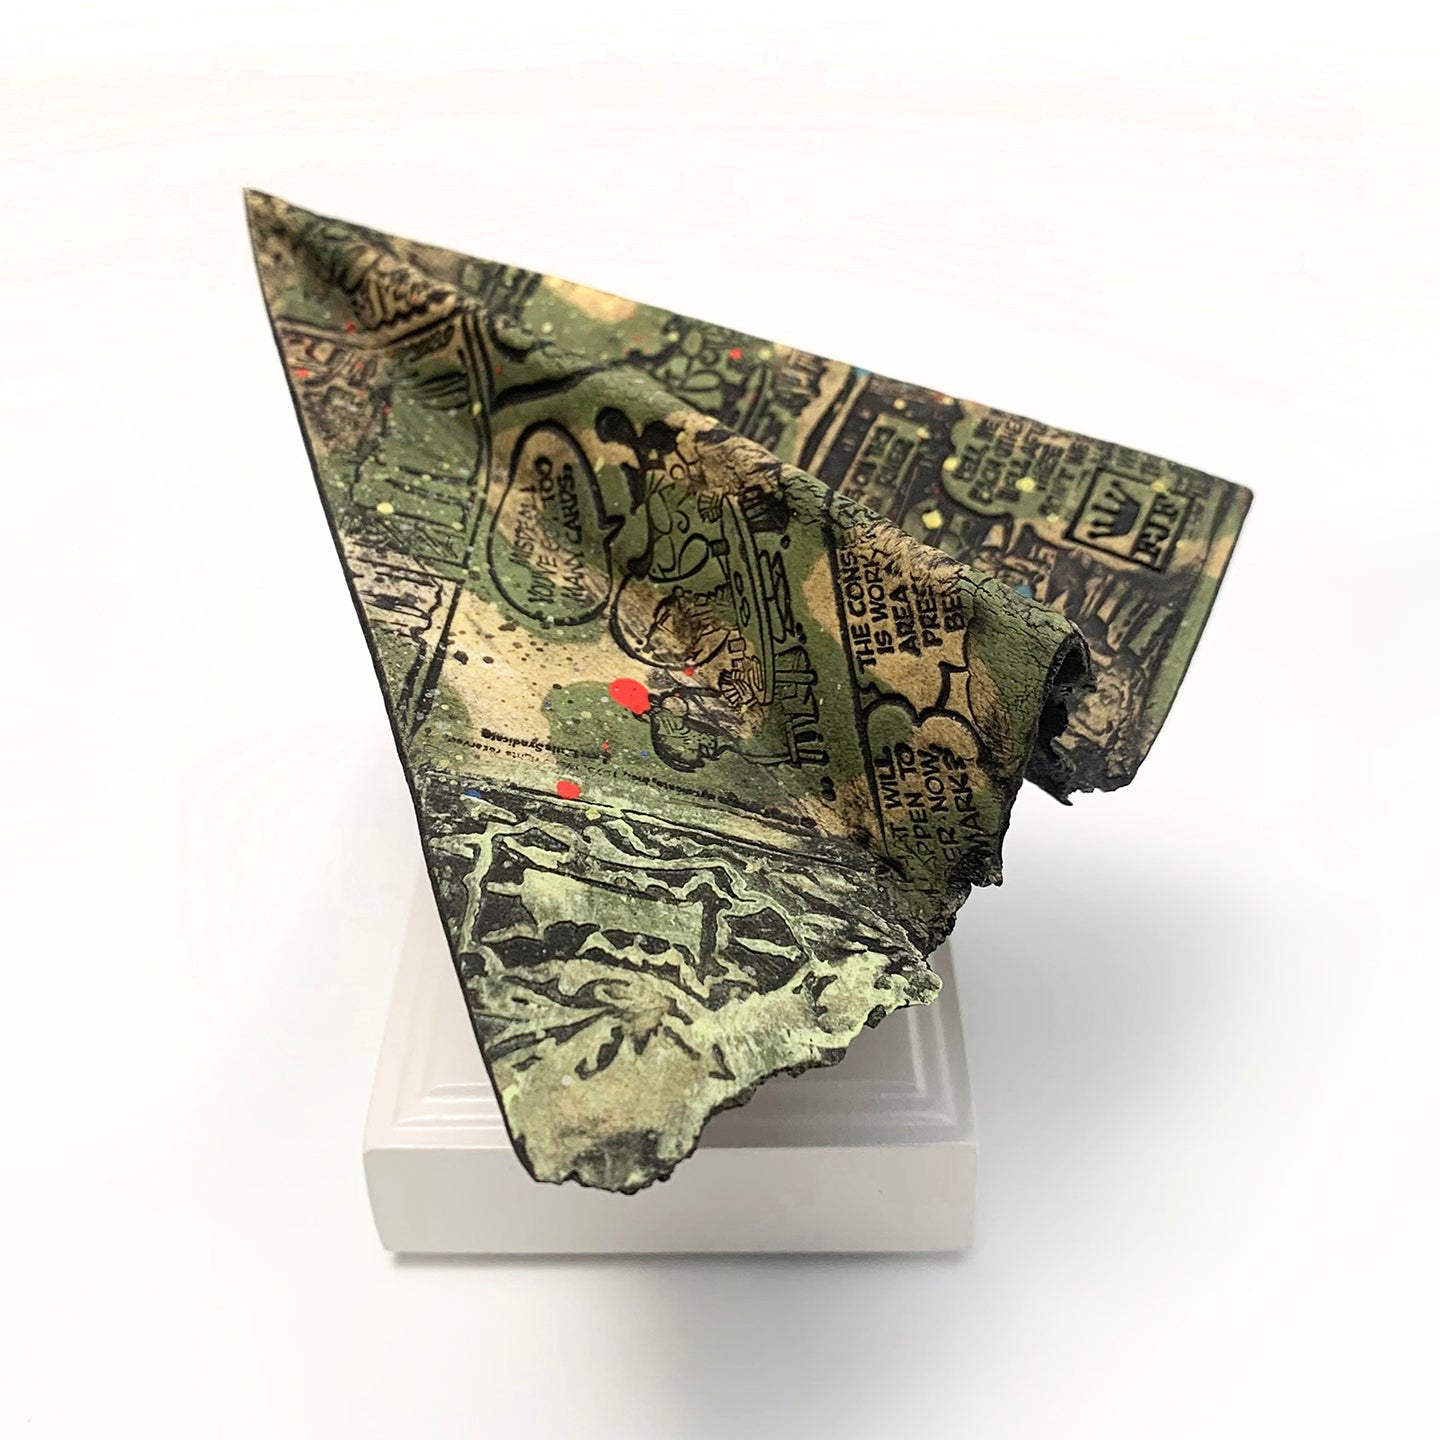 Frank James Fisher's paper airplanes are recognizable icons covered in graphics and commentary.  Slab-Built Paper Clay, Cone 5 Oxidation fired with wood stand. 